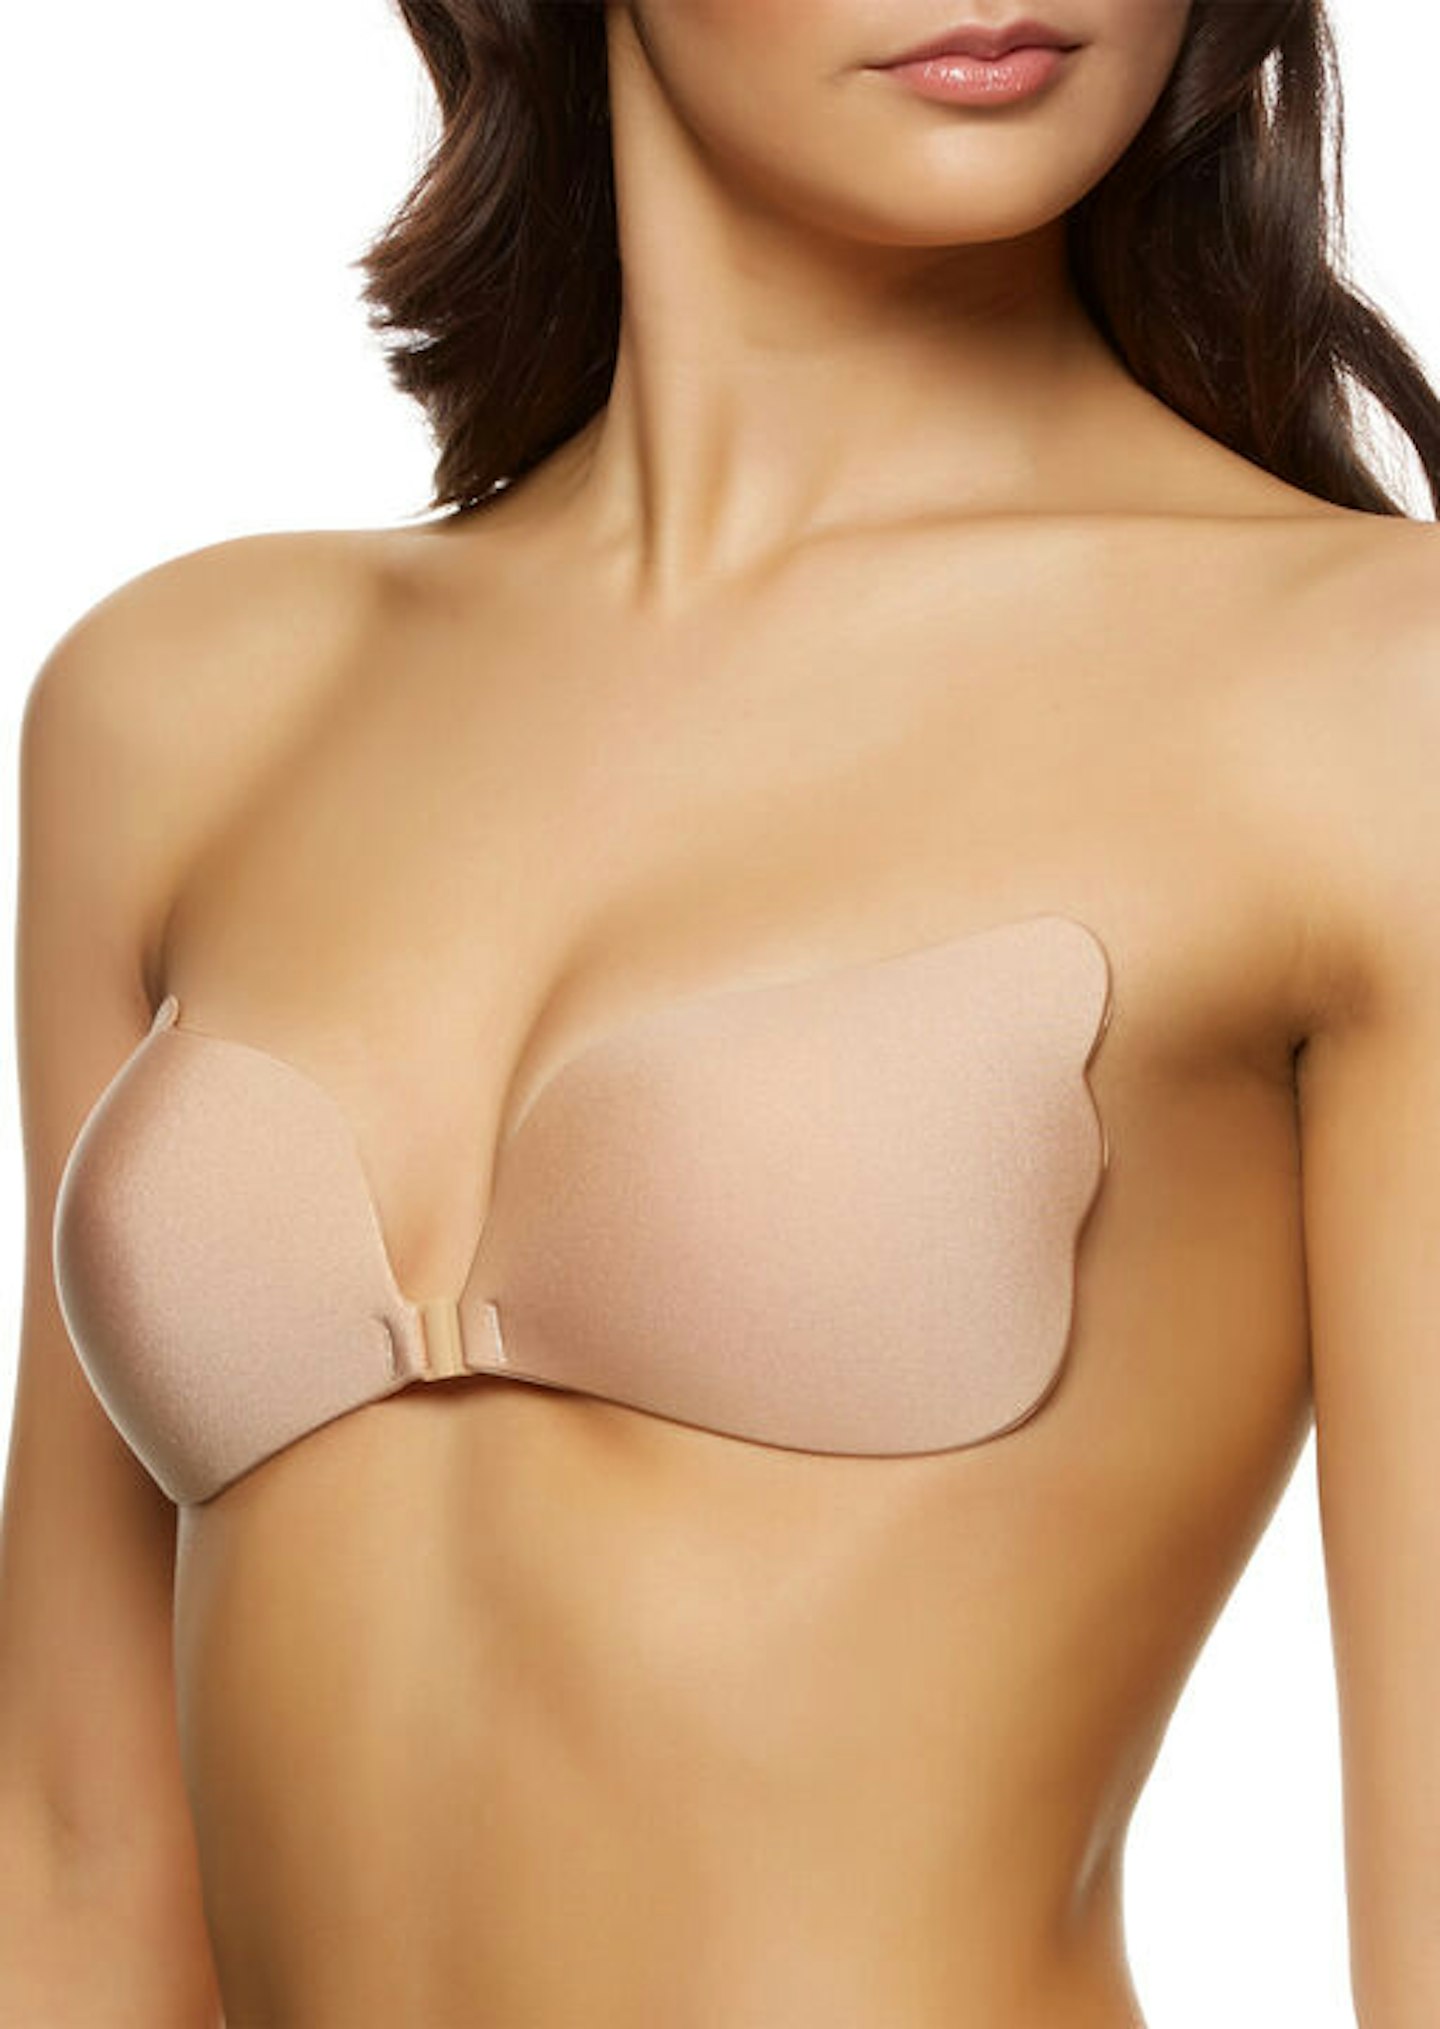 Tried and Tested: Wonderbra Ultimate strapless bra - my fashion life